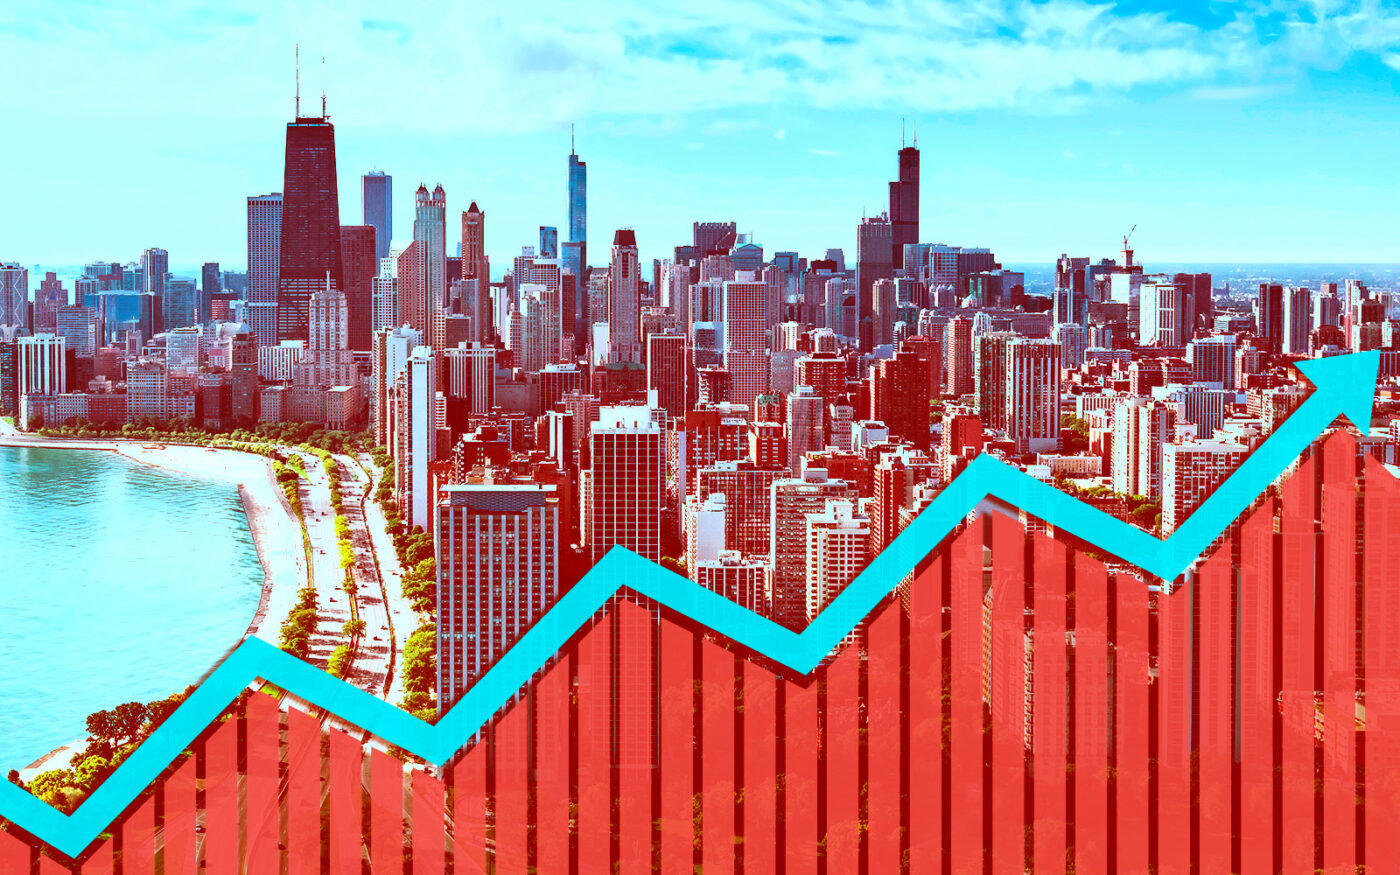 Chicago-area home prices hit a record high in April, amid strong demand and low inventory